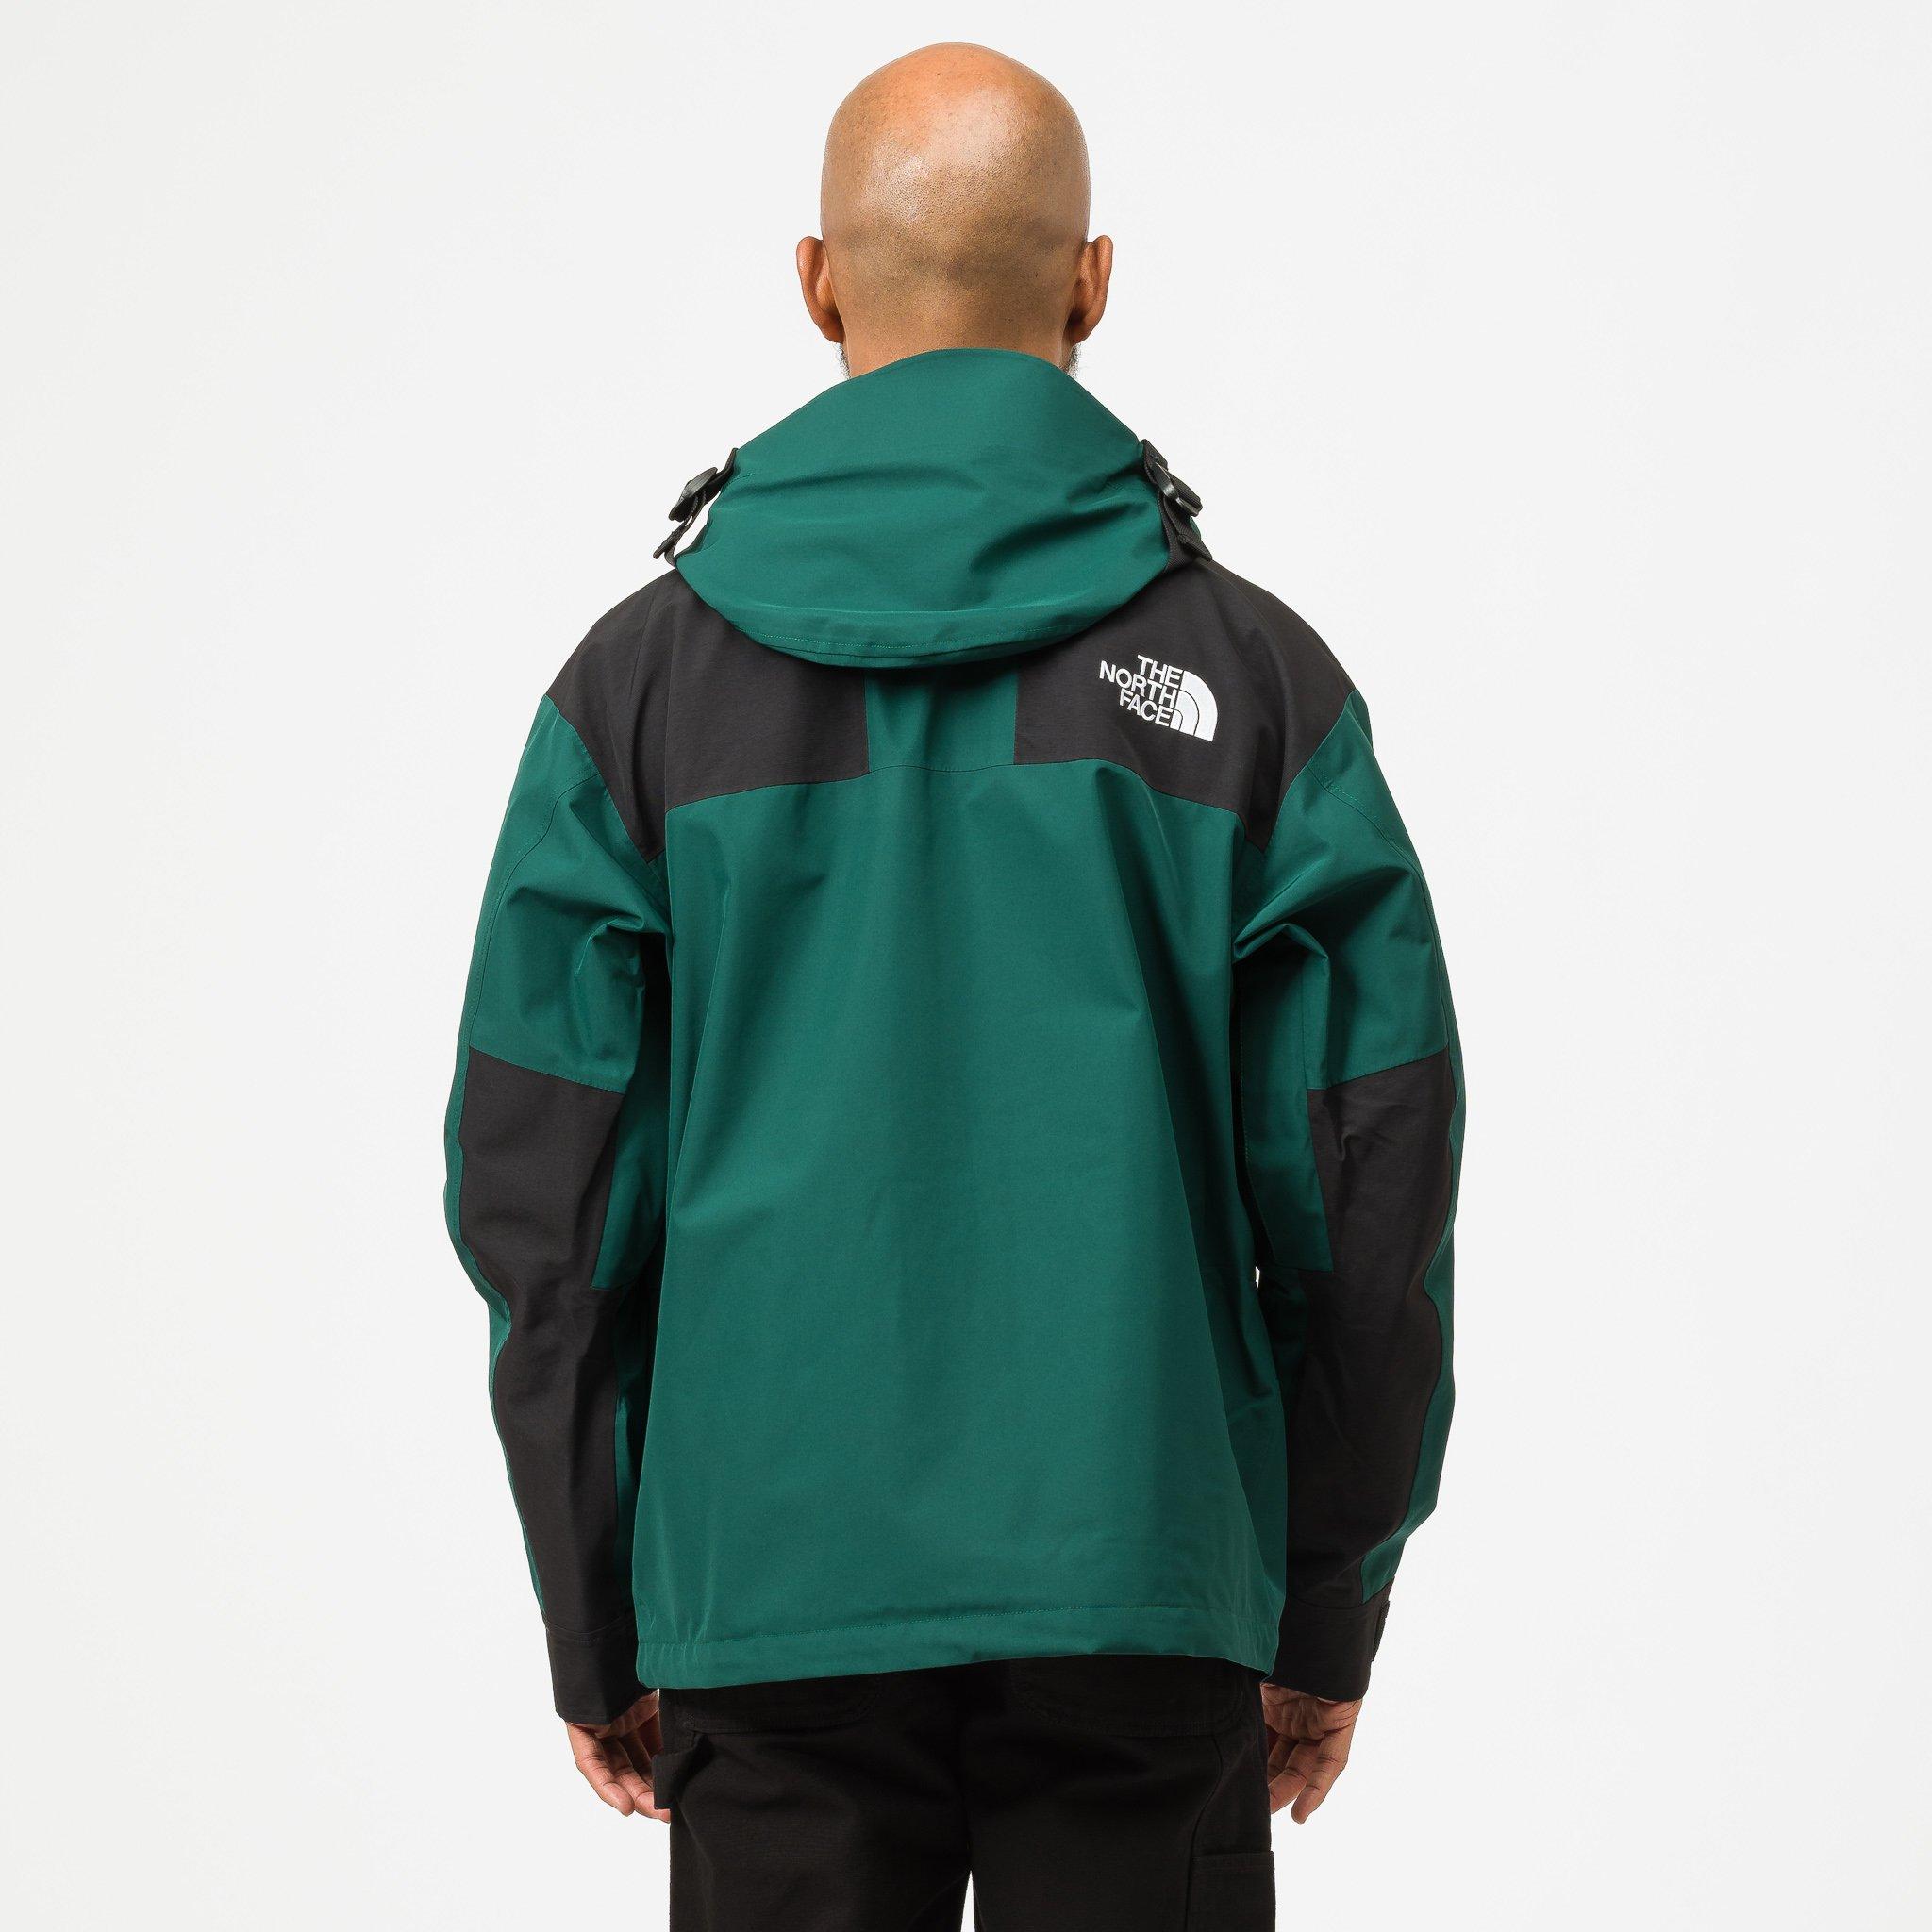 north face mountain jacket green